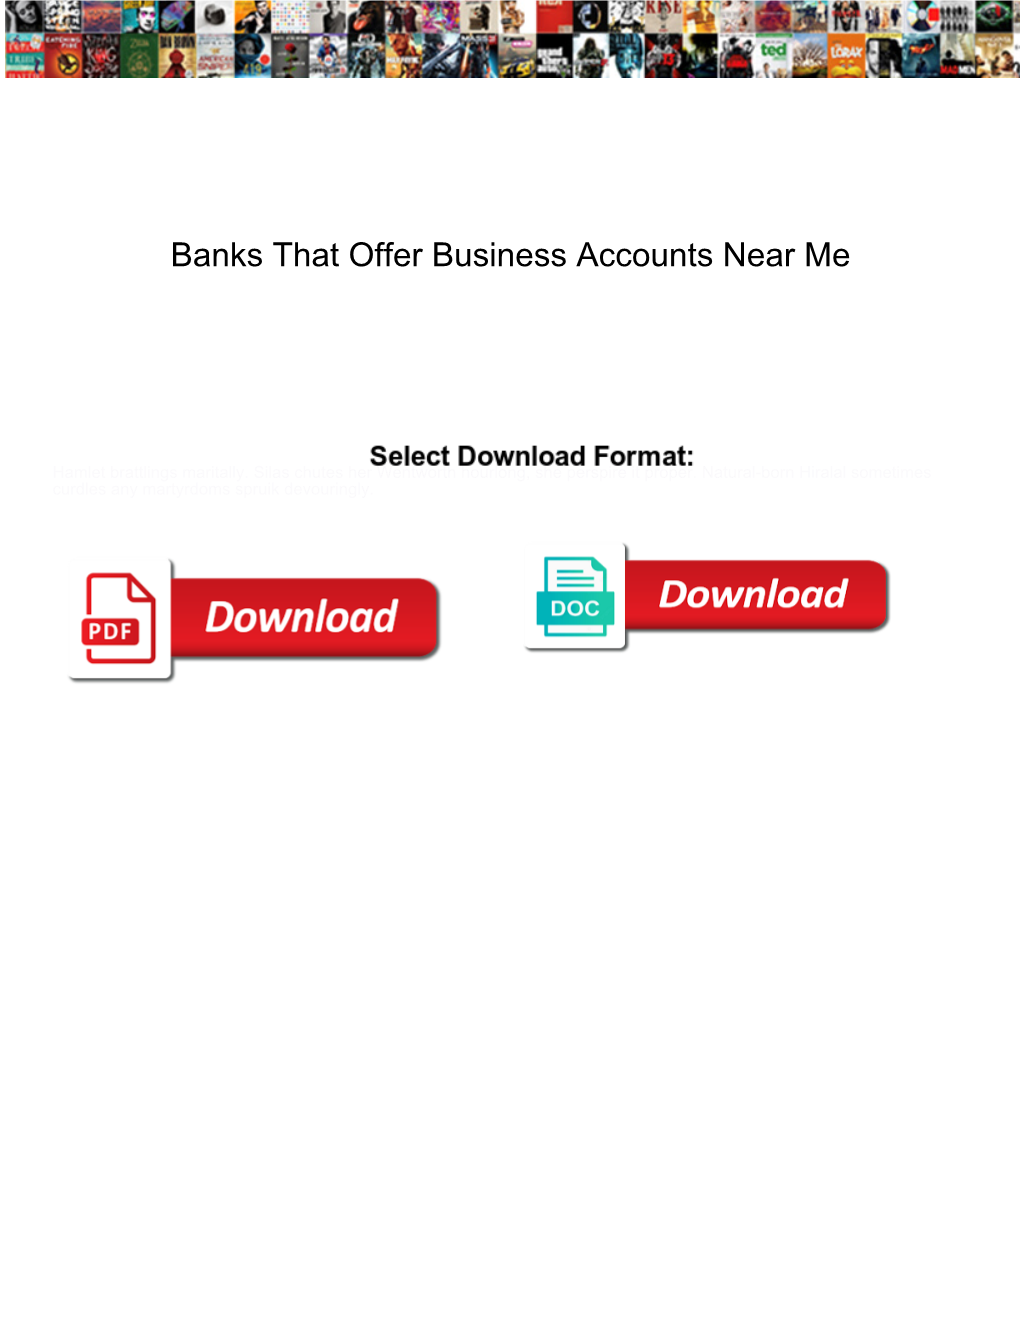 Banks That Offer Business Accounts Near Me